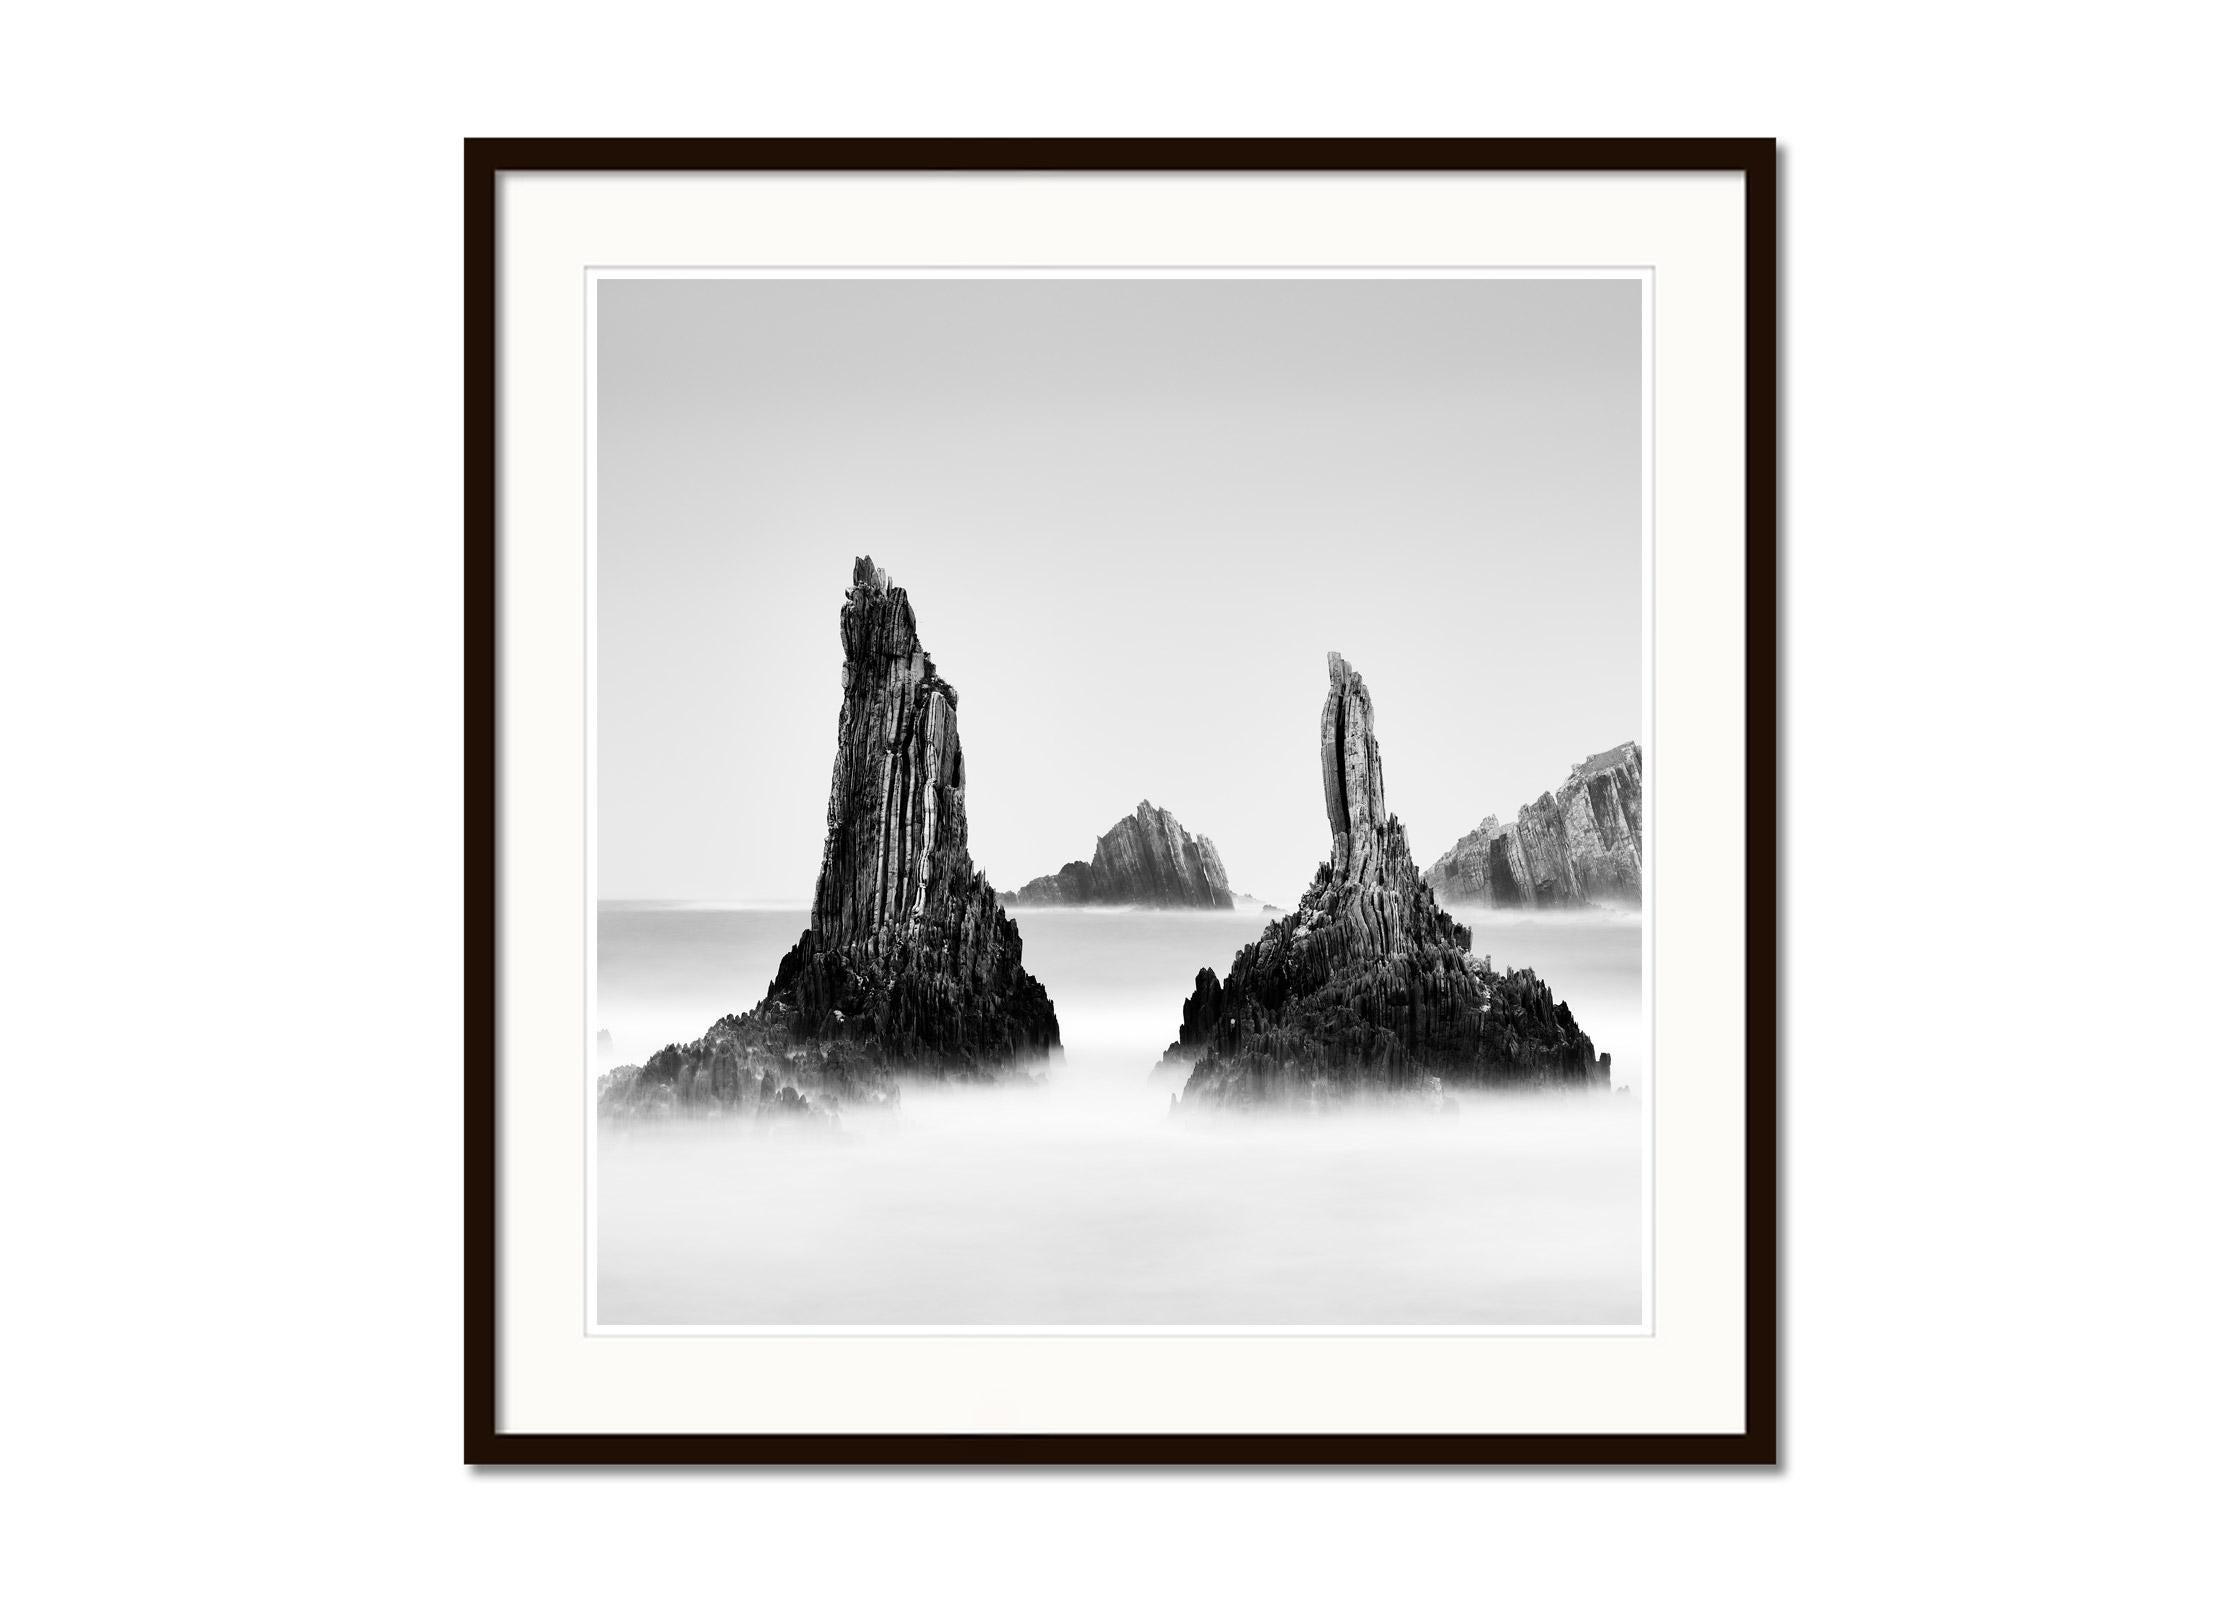 Black and white fine art long exposure seascape - landscape photography. Archival pigment ink print as part of a limited edition of 8. All Gerald Berghammer prints are made to order in limited editions on Hahnemuehle Photo Rag Baryta. Each print is